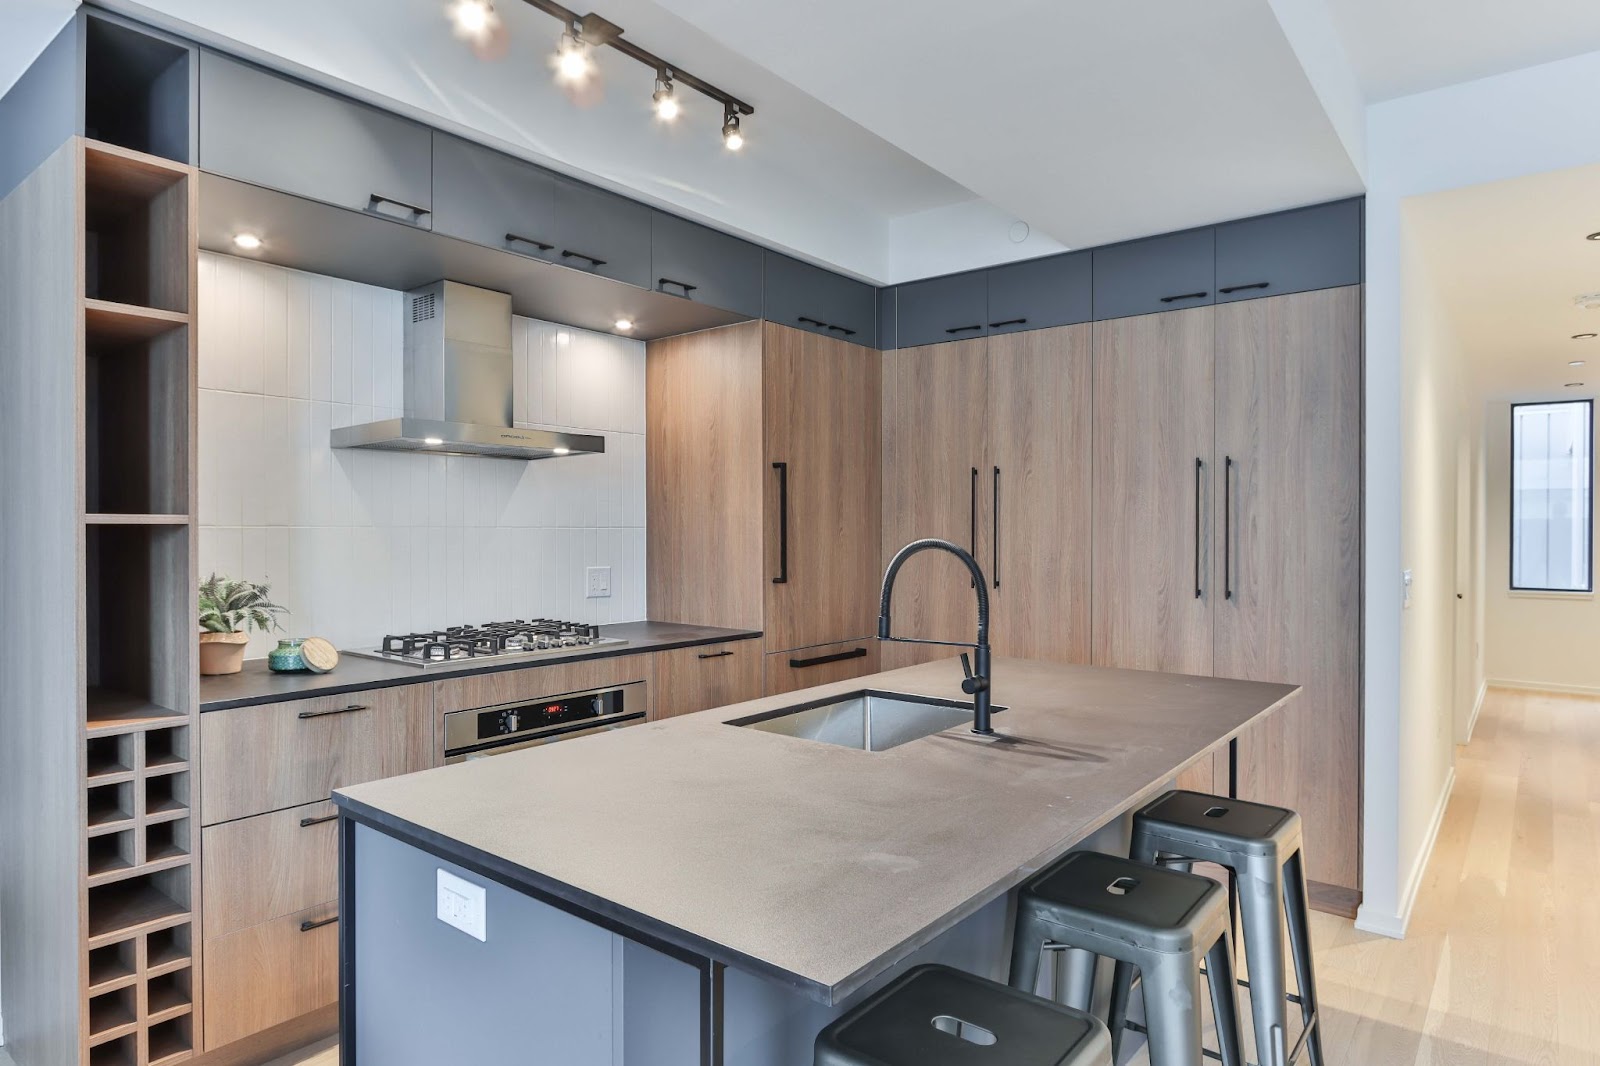 7 Kitchen Cabinet Materials to Choose